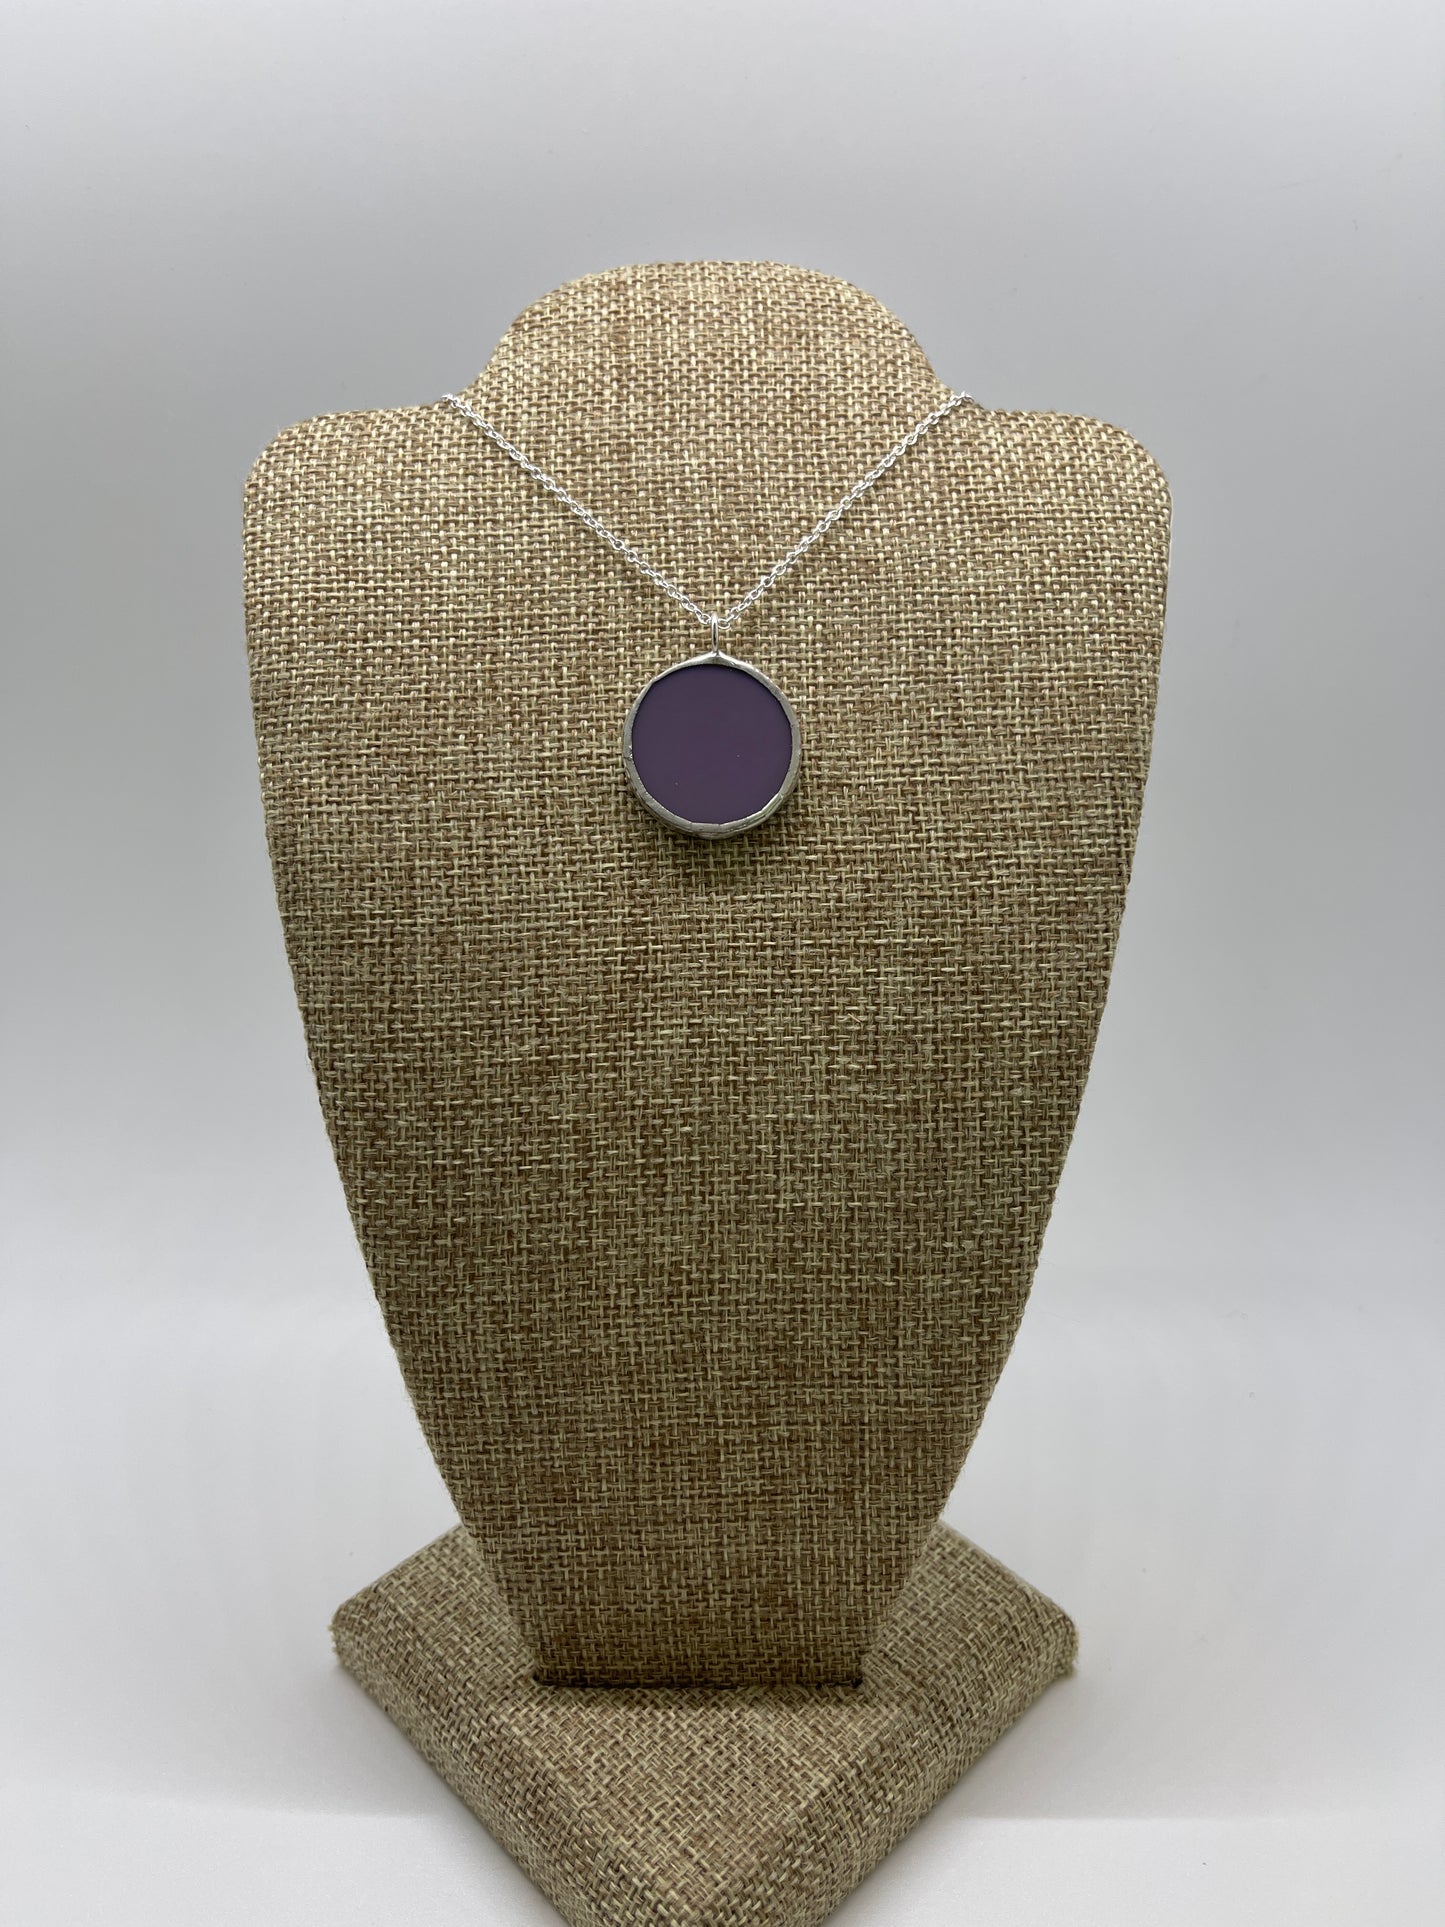 Stained Glass Necklace: 1” Circle, Opaque Lavender